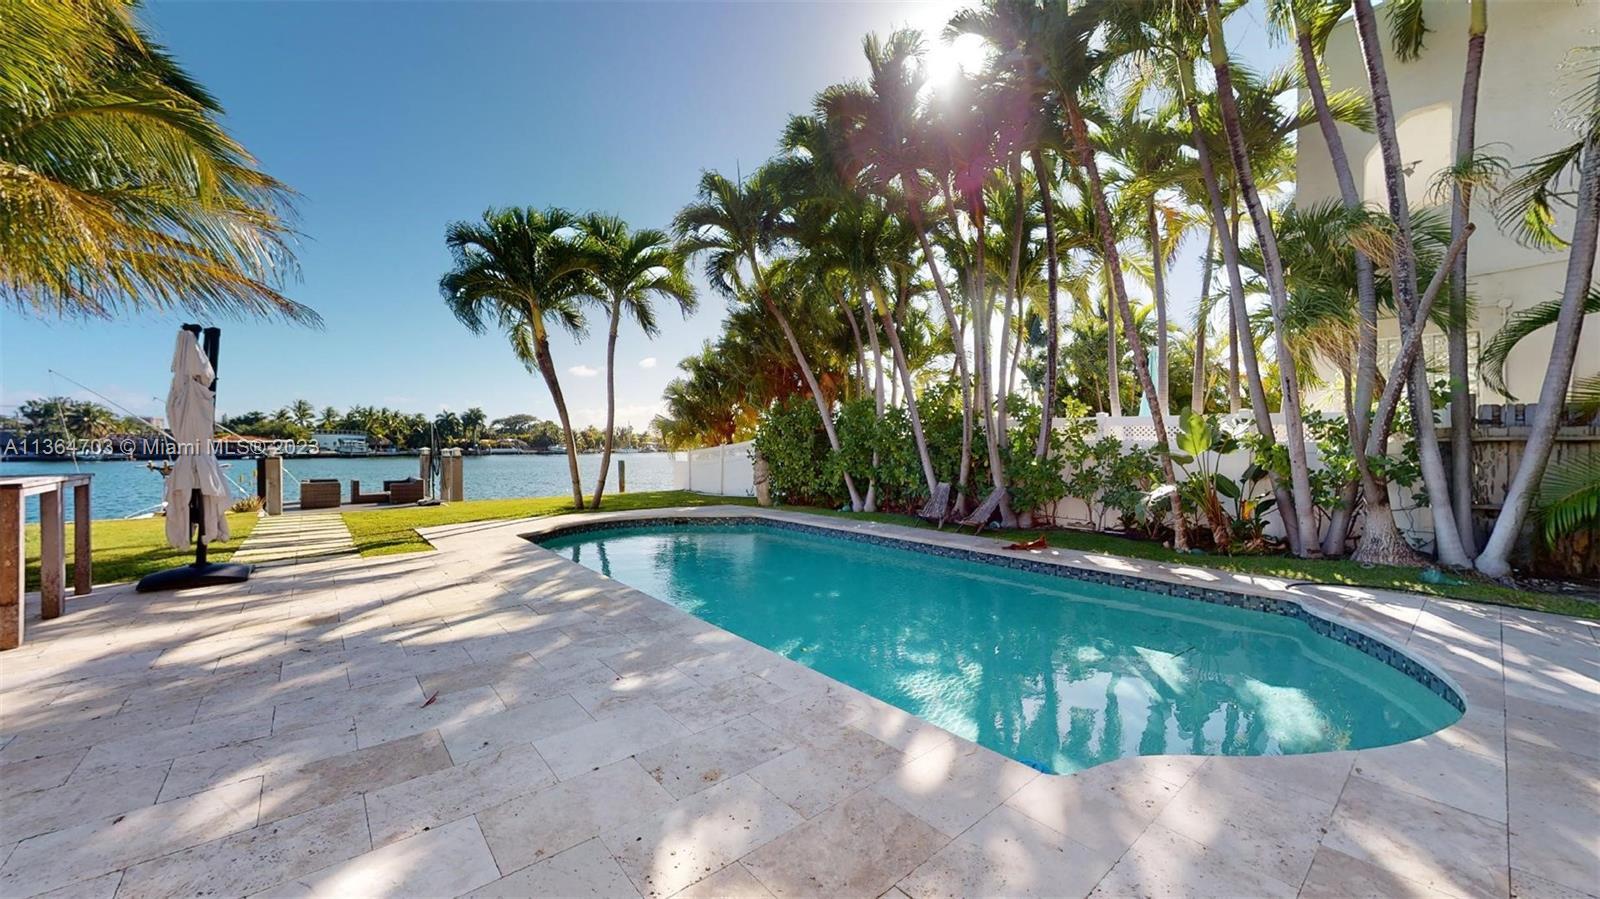 Beautiful and spacious wide view waterfront home in coveted Surfside. This home has an open floor pl